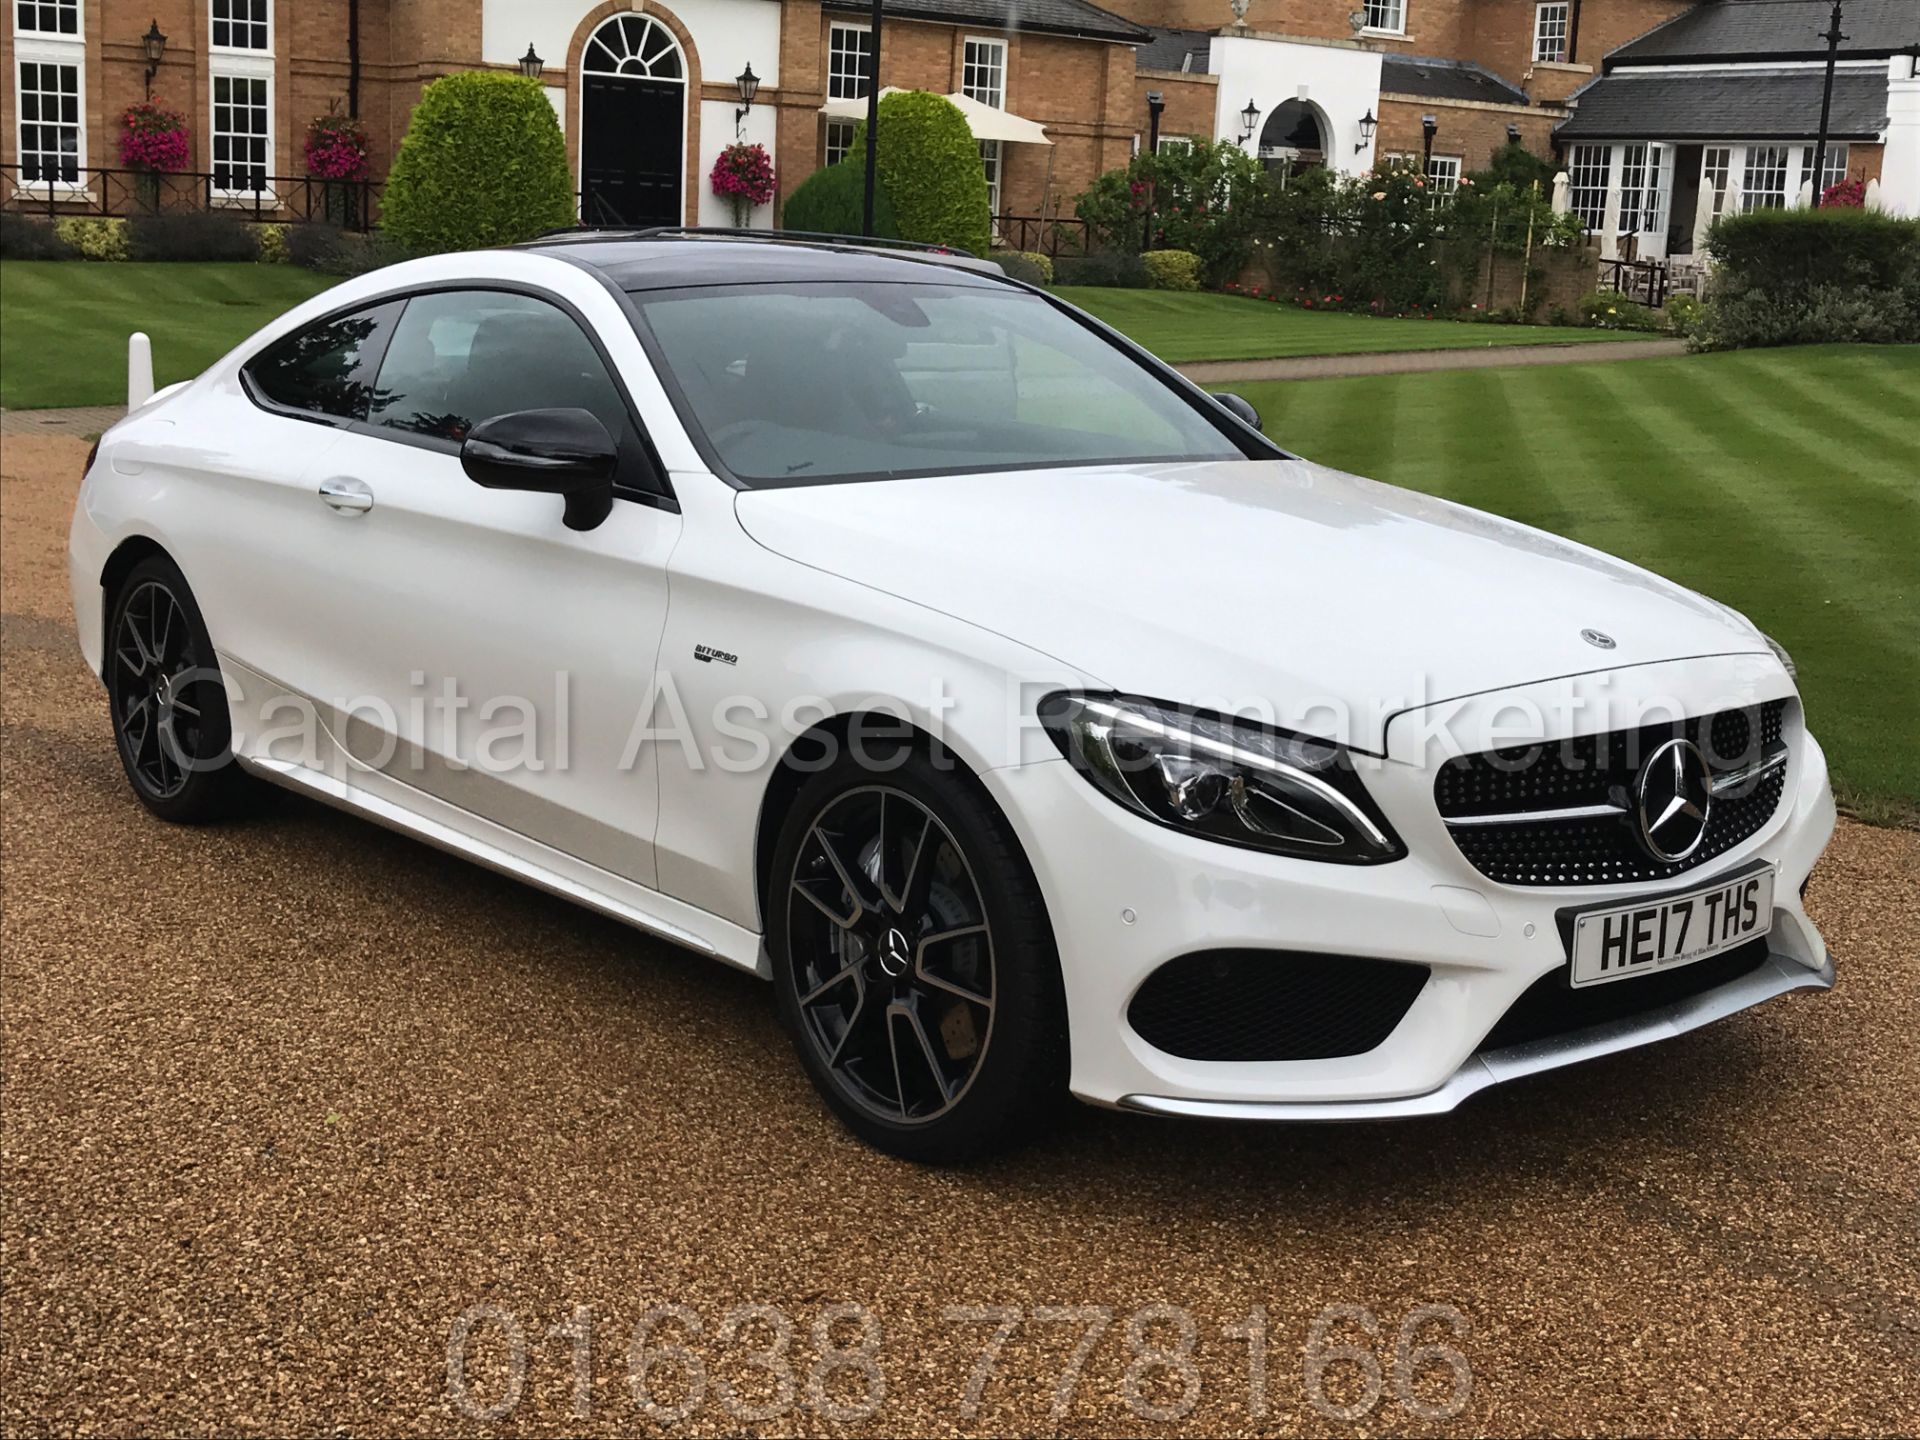 MEREDES-BENZ C43 AMG PREMIUM '4 MATIC' COUPE (2017) '9-G AUTO - LEATHER - SAT NAV' **FULLY LOADED**